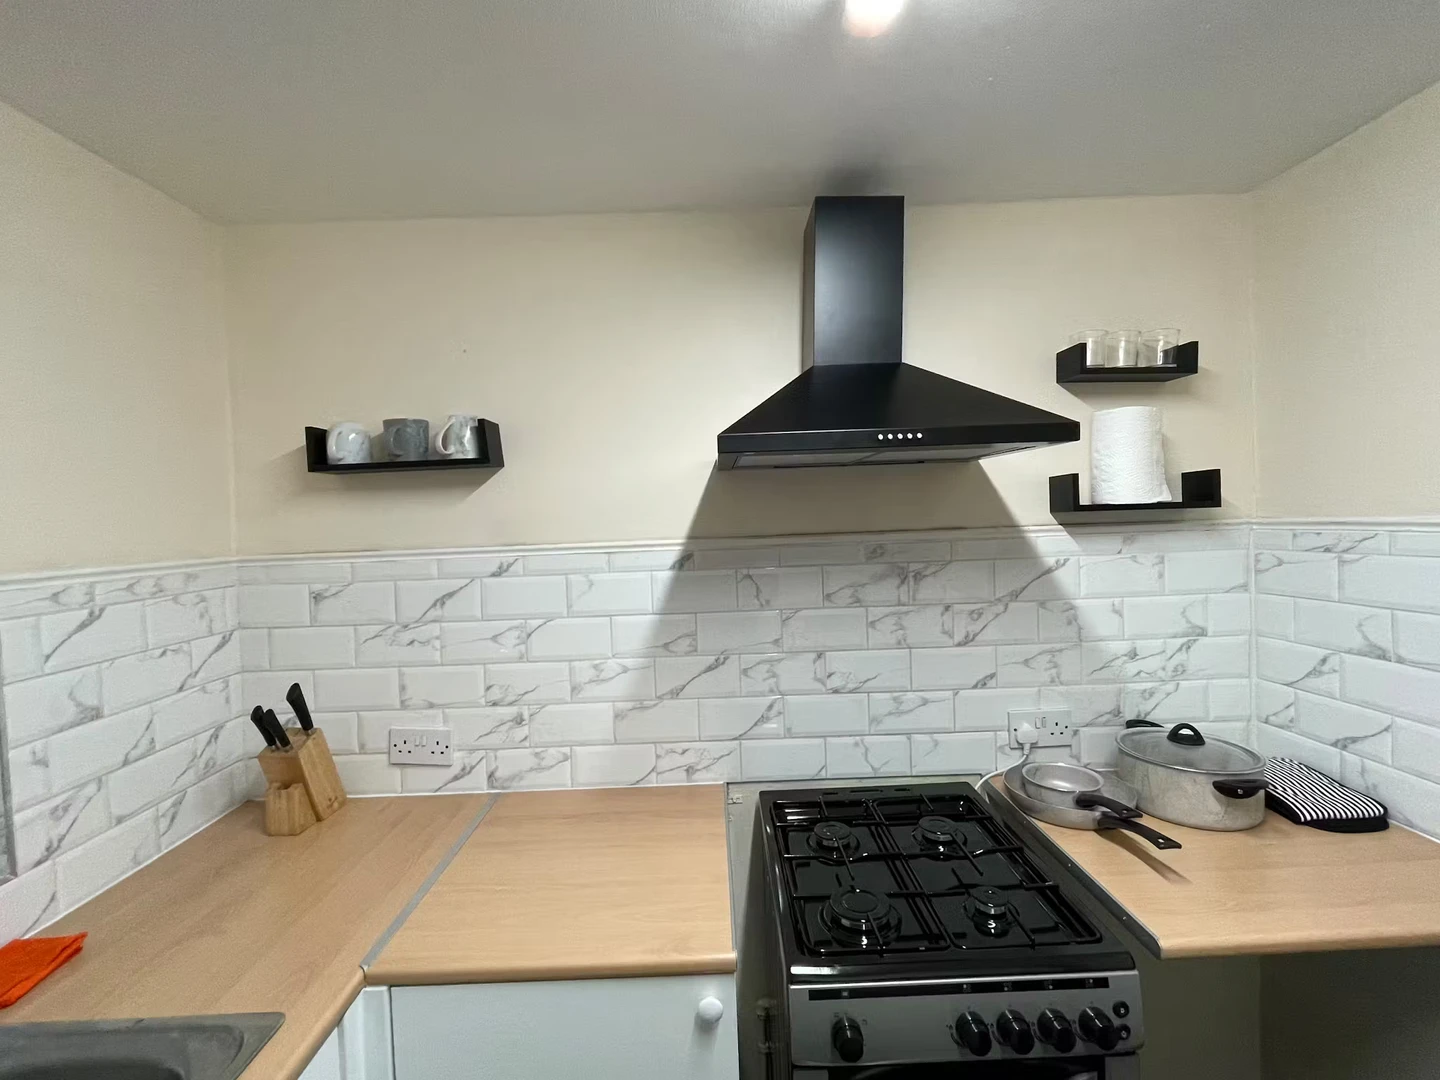 Two bedroom accommodation in Leeds